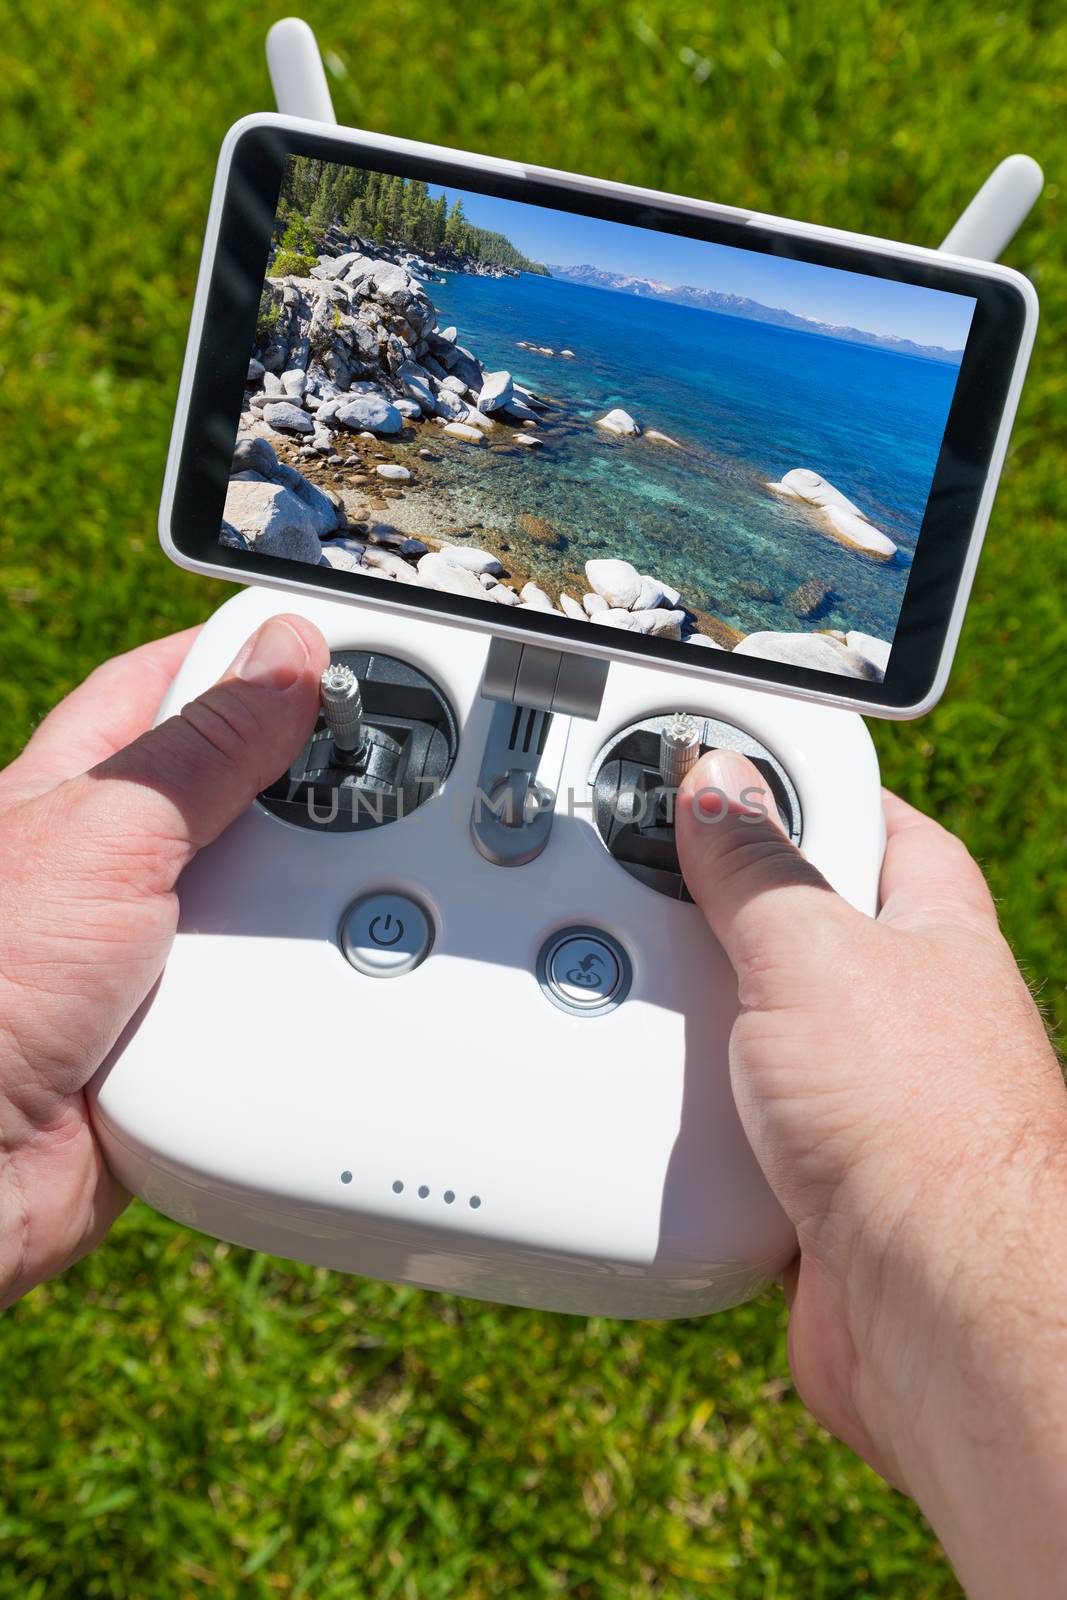 Hands Holding Drone Quadcopter Controller With Beautiful Lake View on Screen.